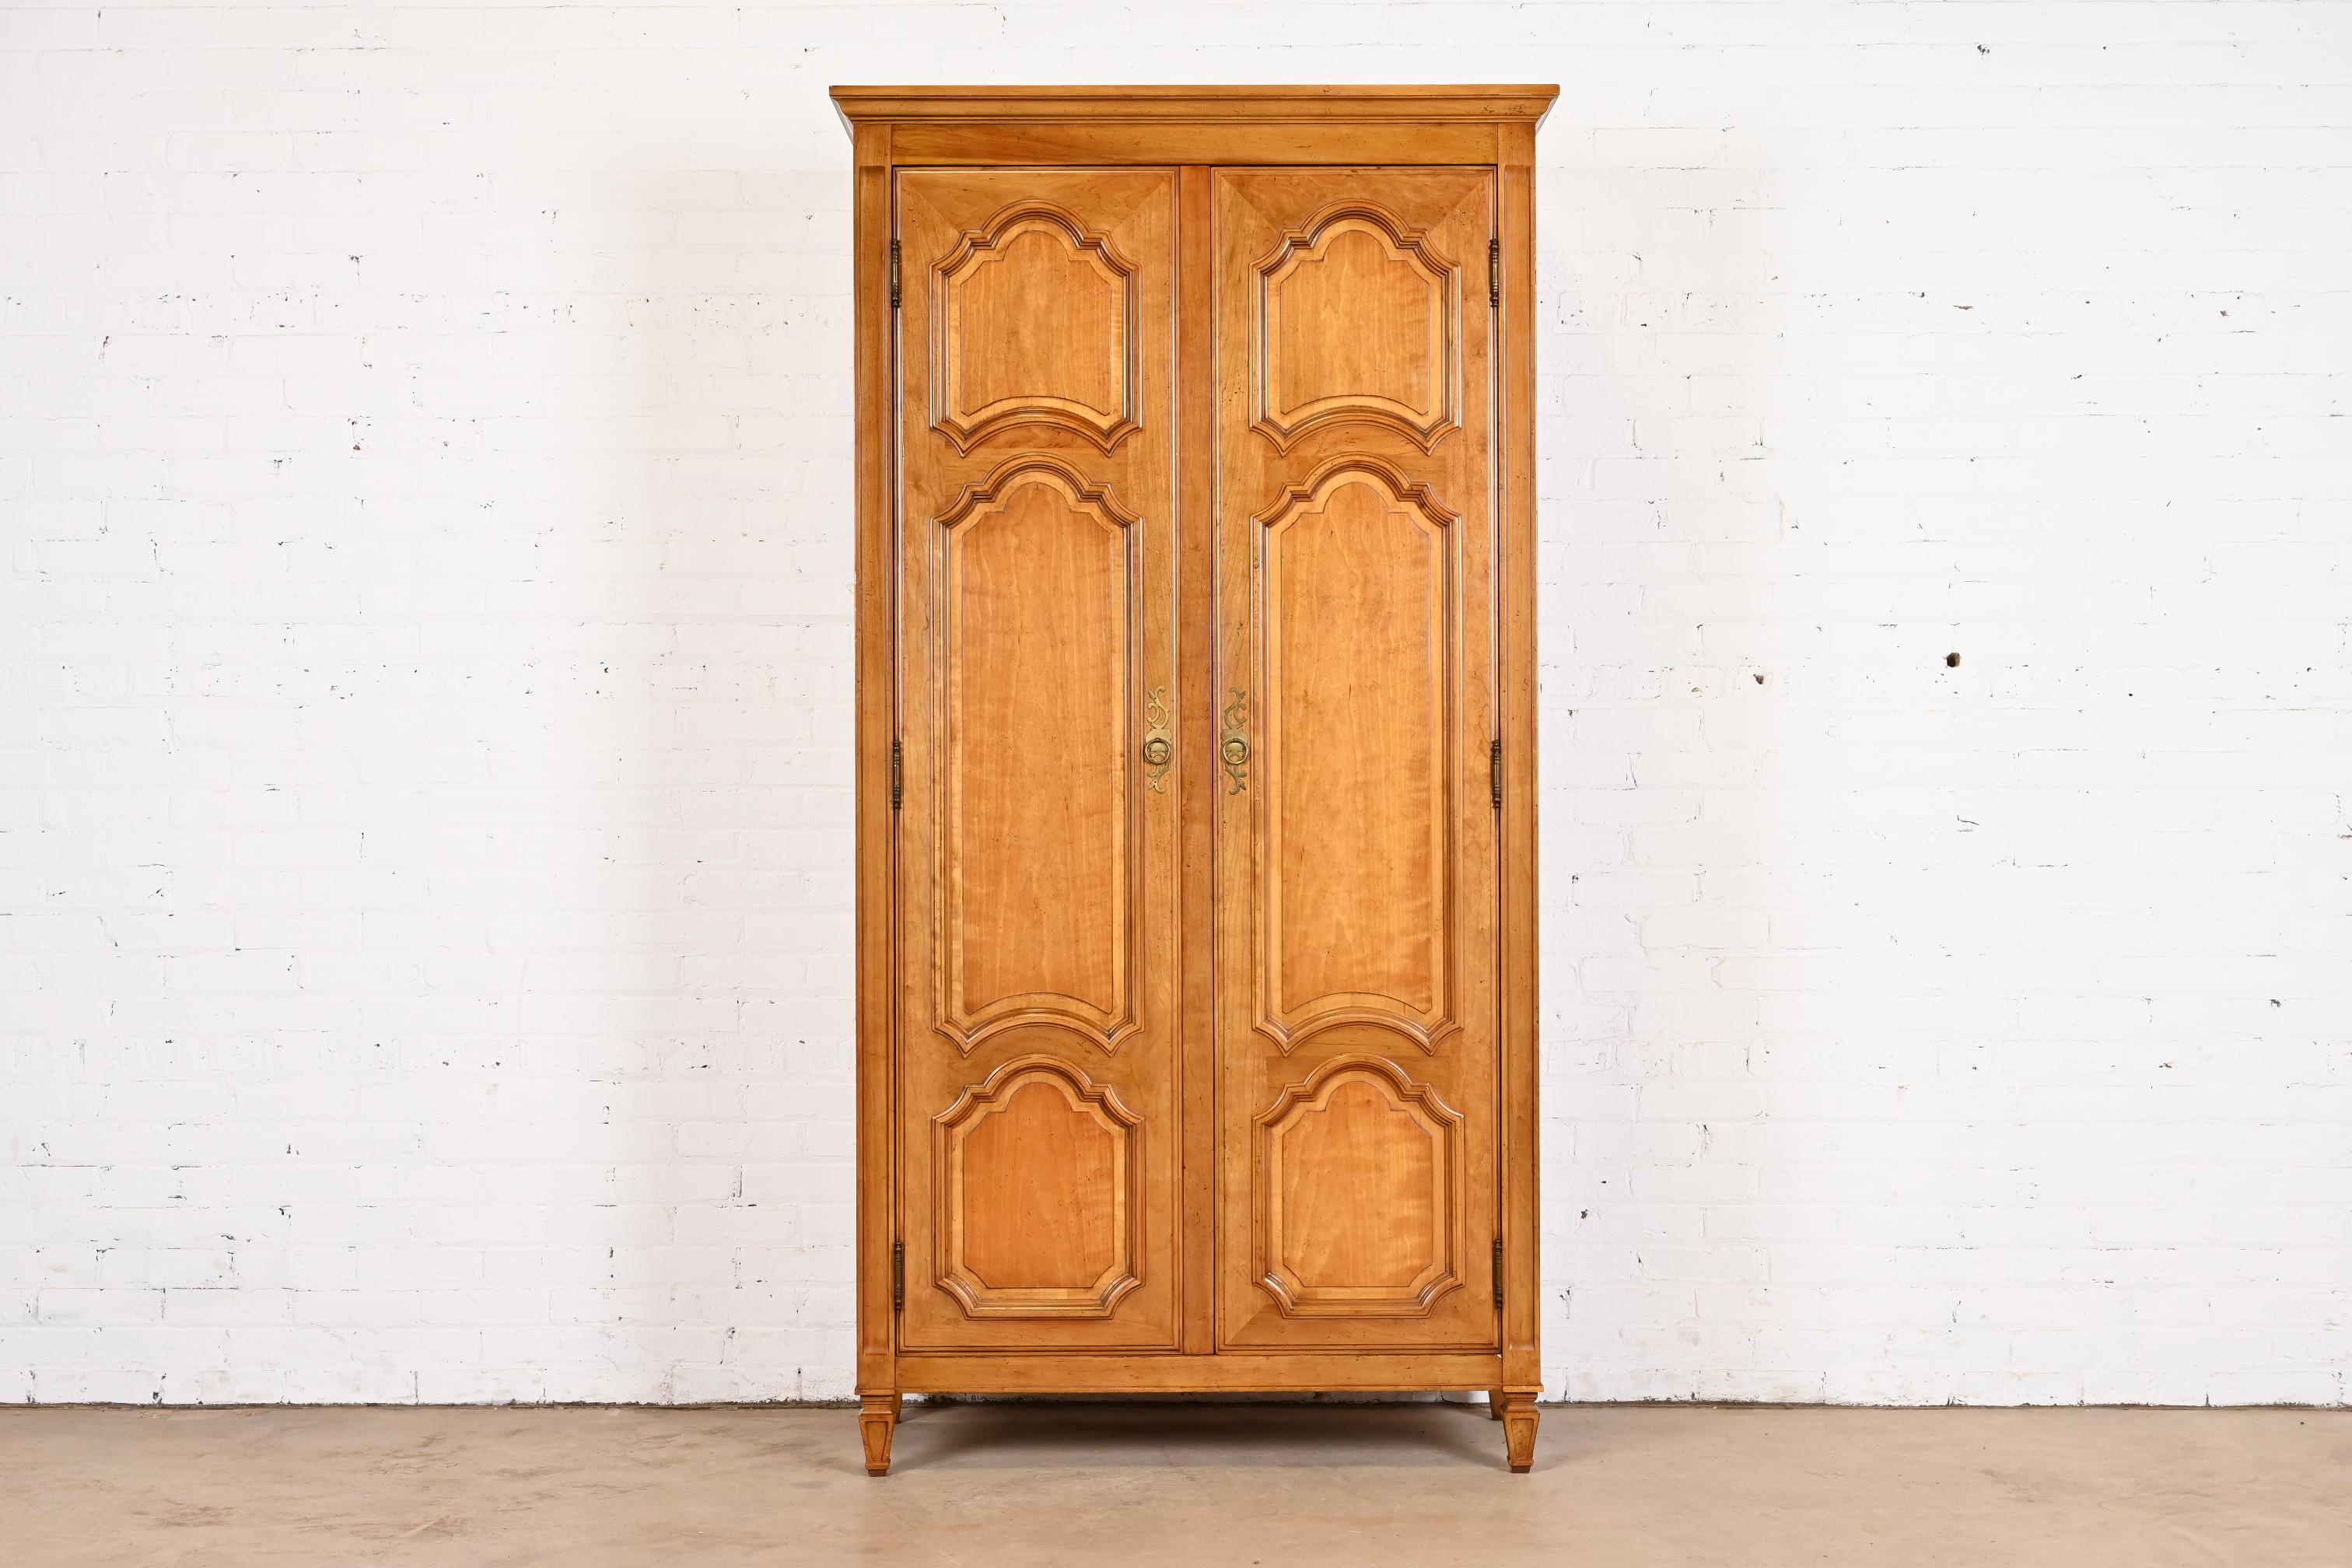 A gorgeous French Regency Louis XVI style armoire dresser or linen press

By Baker Furniture, 